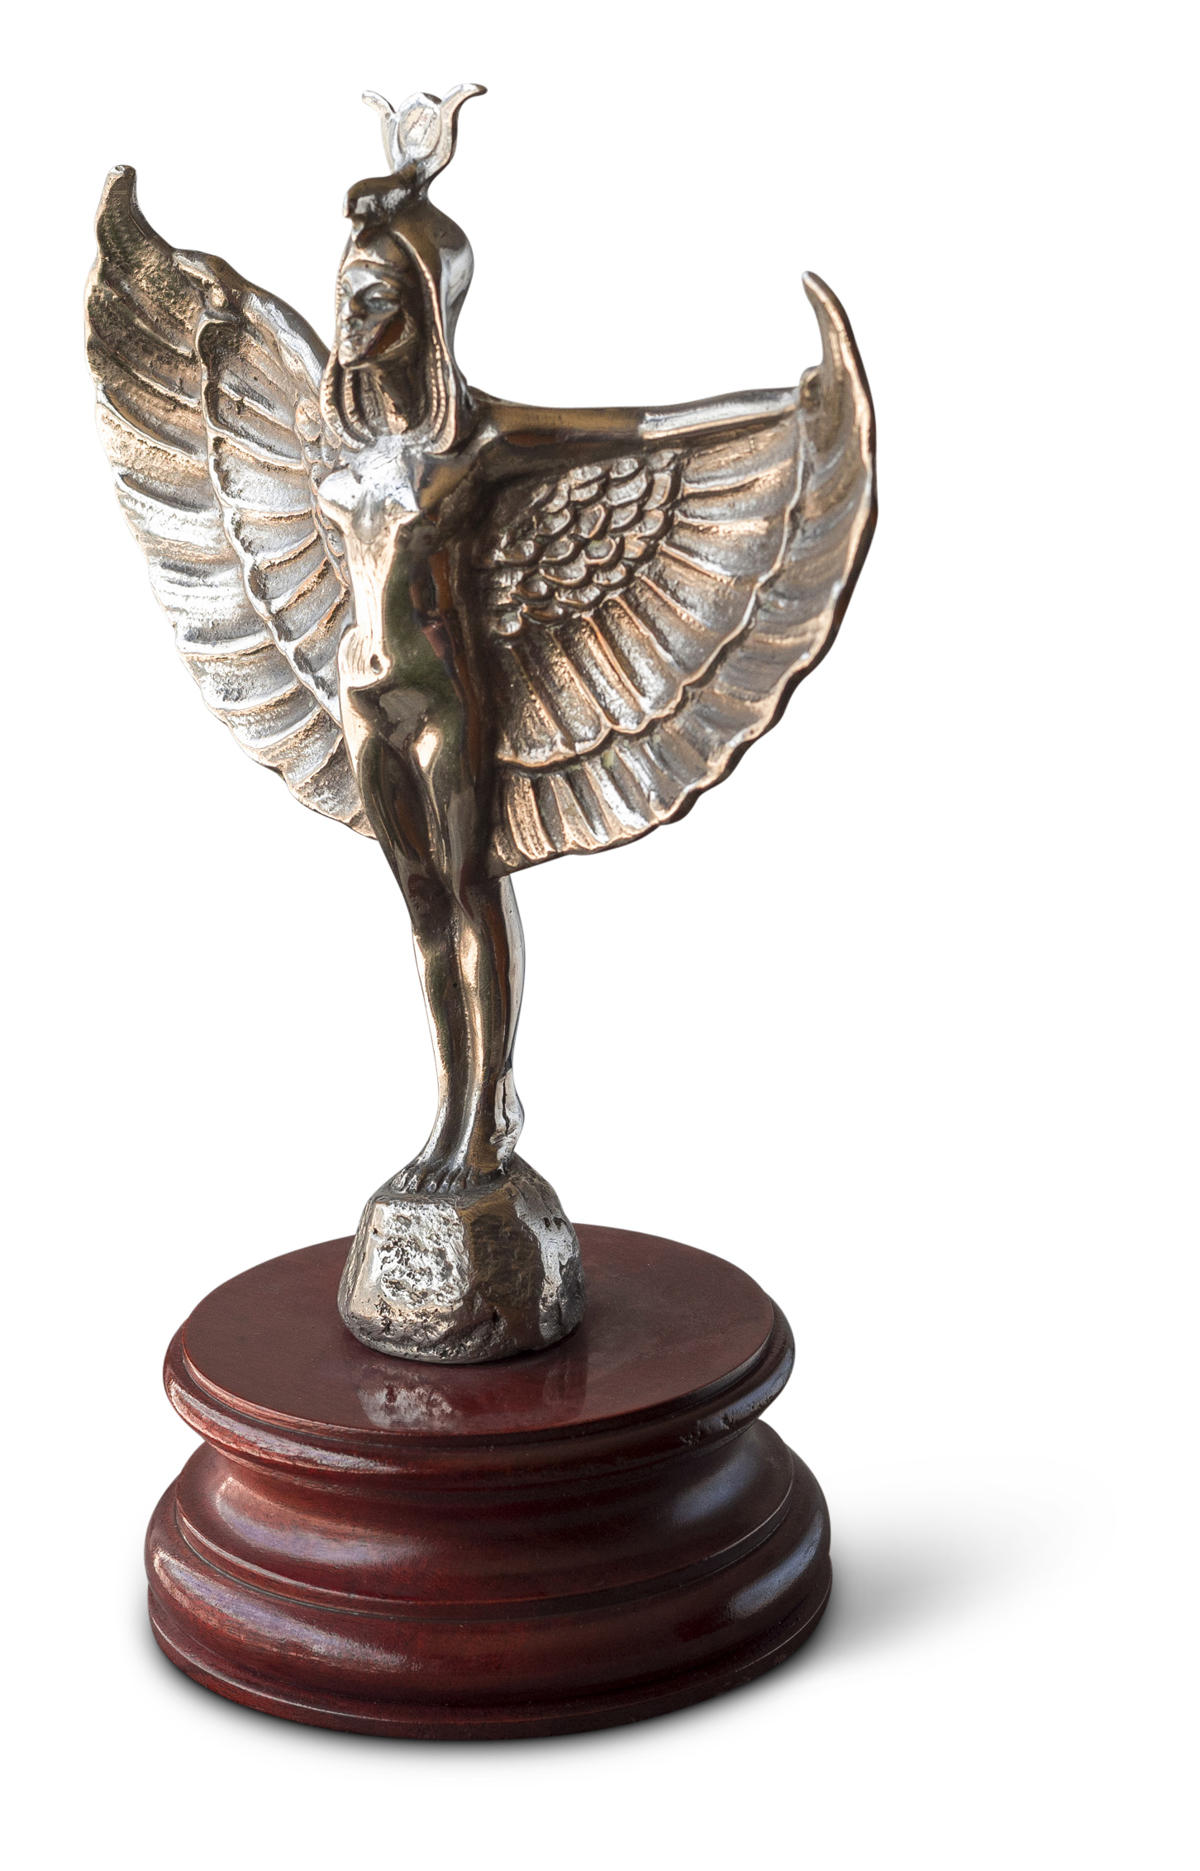 Winged Nude Mascot ca. 1920s offered at RM Sotheby's The Mitosinka Collection online auction 2020